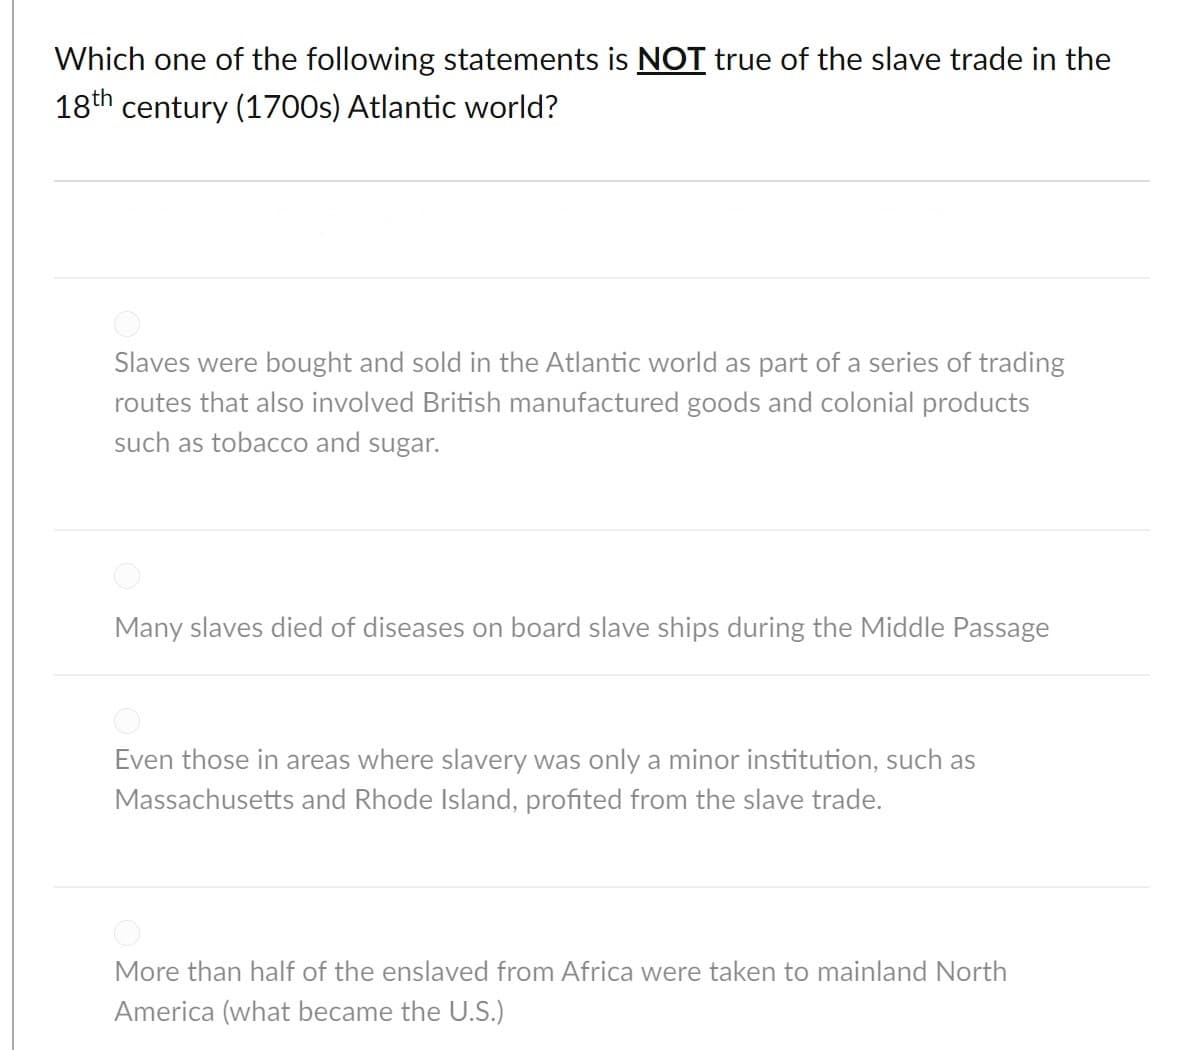 Which one of the following statements is NOT true of the slave trade in the
18th century (1700s) Atlantic world?
Slaves were bought and sold in the Atlantic world as part of a series of trading
routes that also involved British manufactured goods and colonial products
such as tobacco and sugar.
Many slaves died of diseases on board slave ships during the Middle Passage
Even those in areas where slavery was only a minor institution, such as
Massachusetts and Rhode Island, profited from the slave trade.
More than half of the enslaved from Africa were taken to mainland North
America (what became the U.S.)
